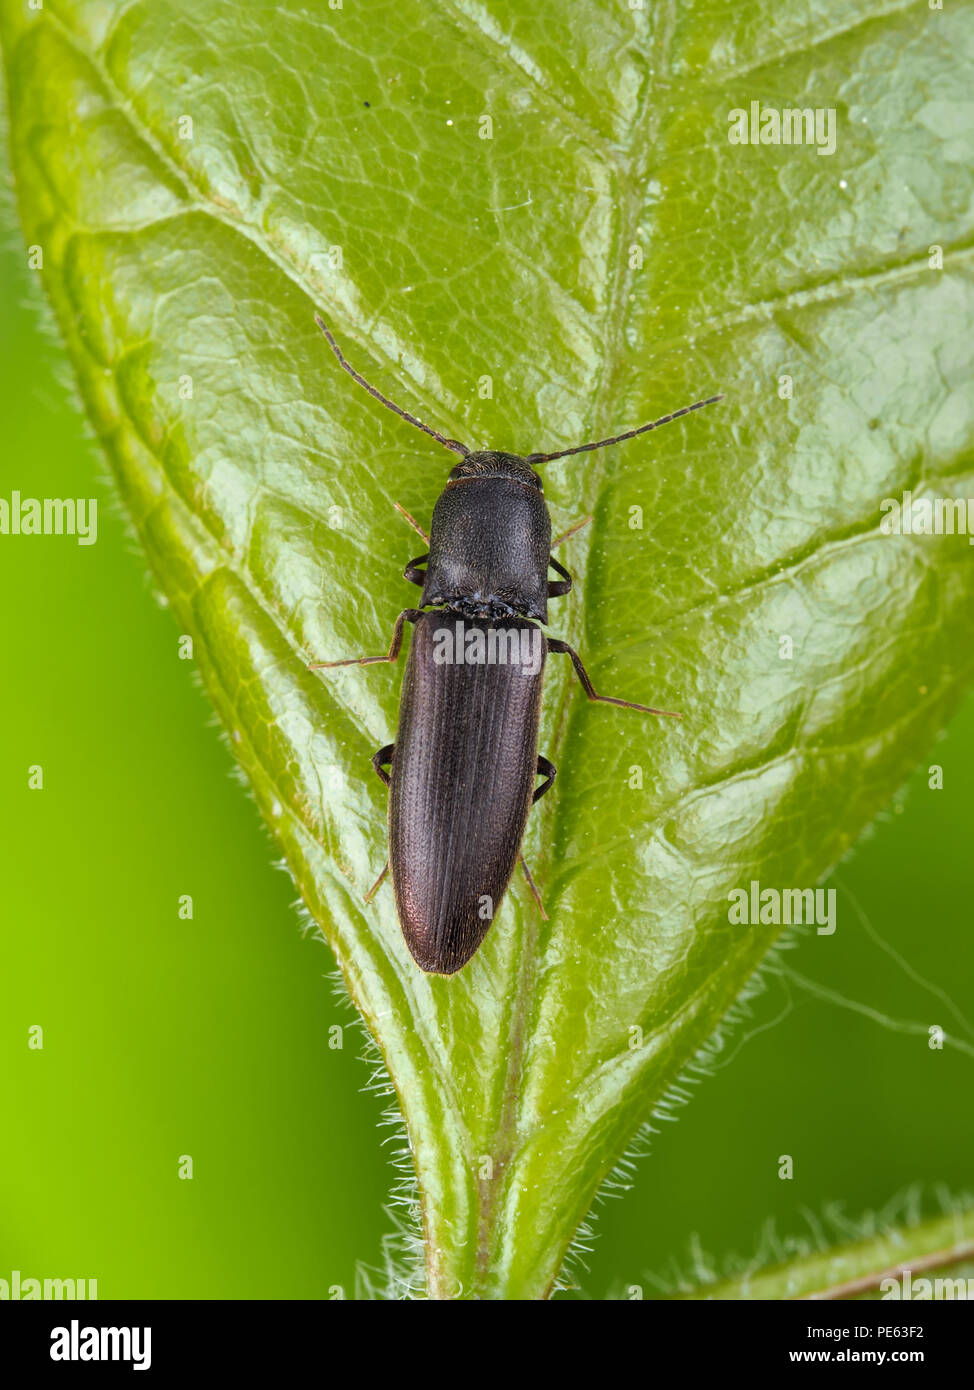 Black click beetle (Elateridae) on a green leaf, dorsal view Stock Photo